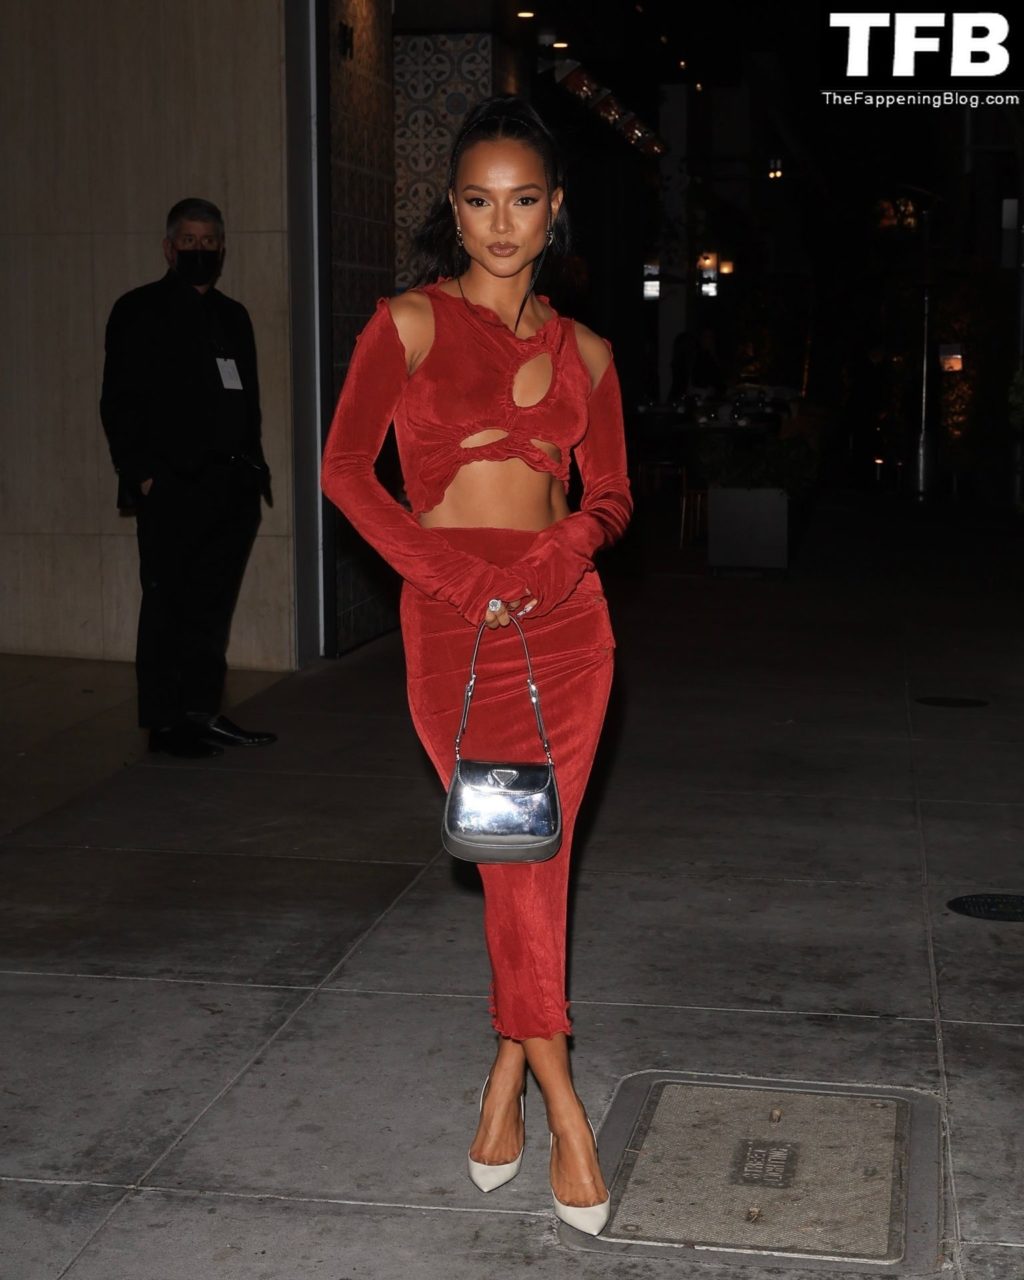 Karrueche Tran Sexy The Fappening Blog 6 1 1024x1280 - Karrueche Tran Shows Her Pokies in a Red Dress at The Hollywood Reporter’s Oscar Nominees Night (68 Photos)